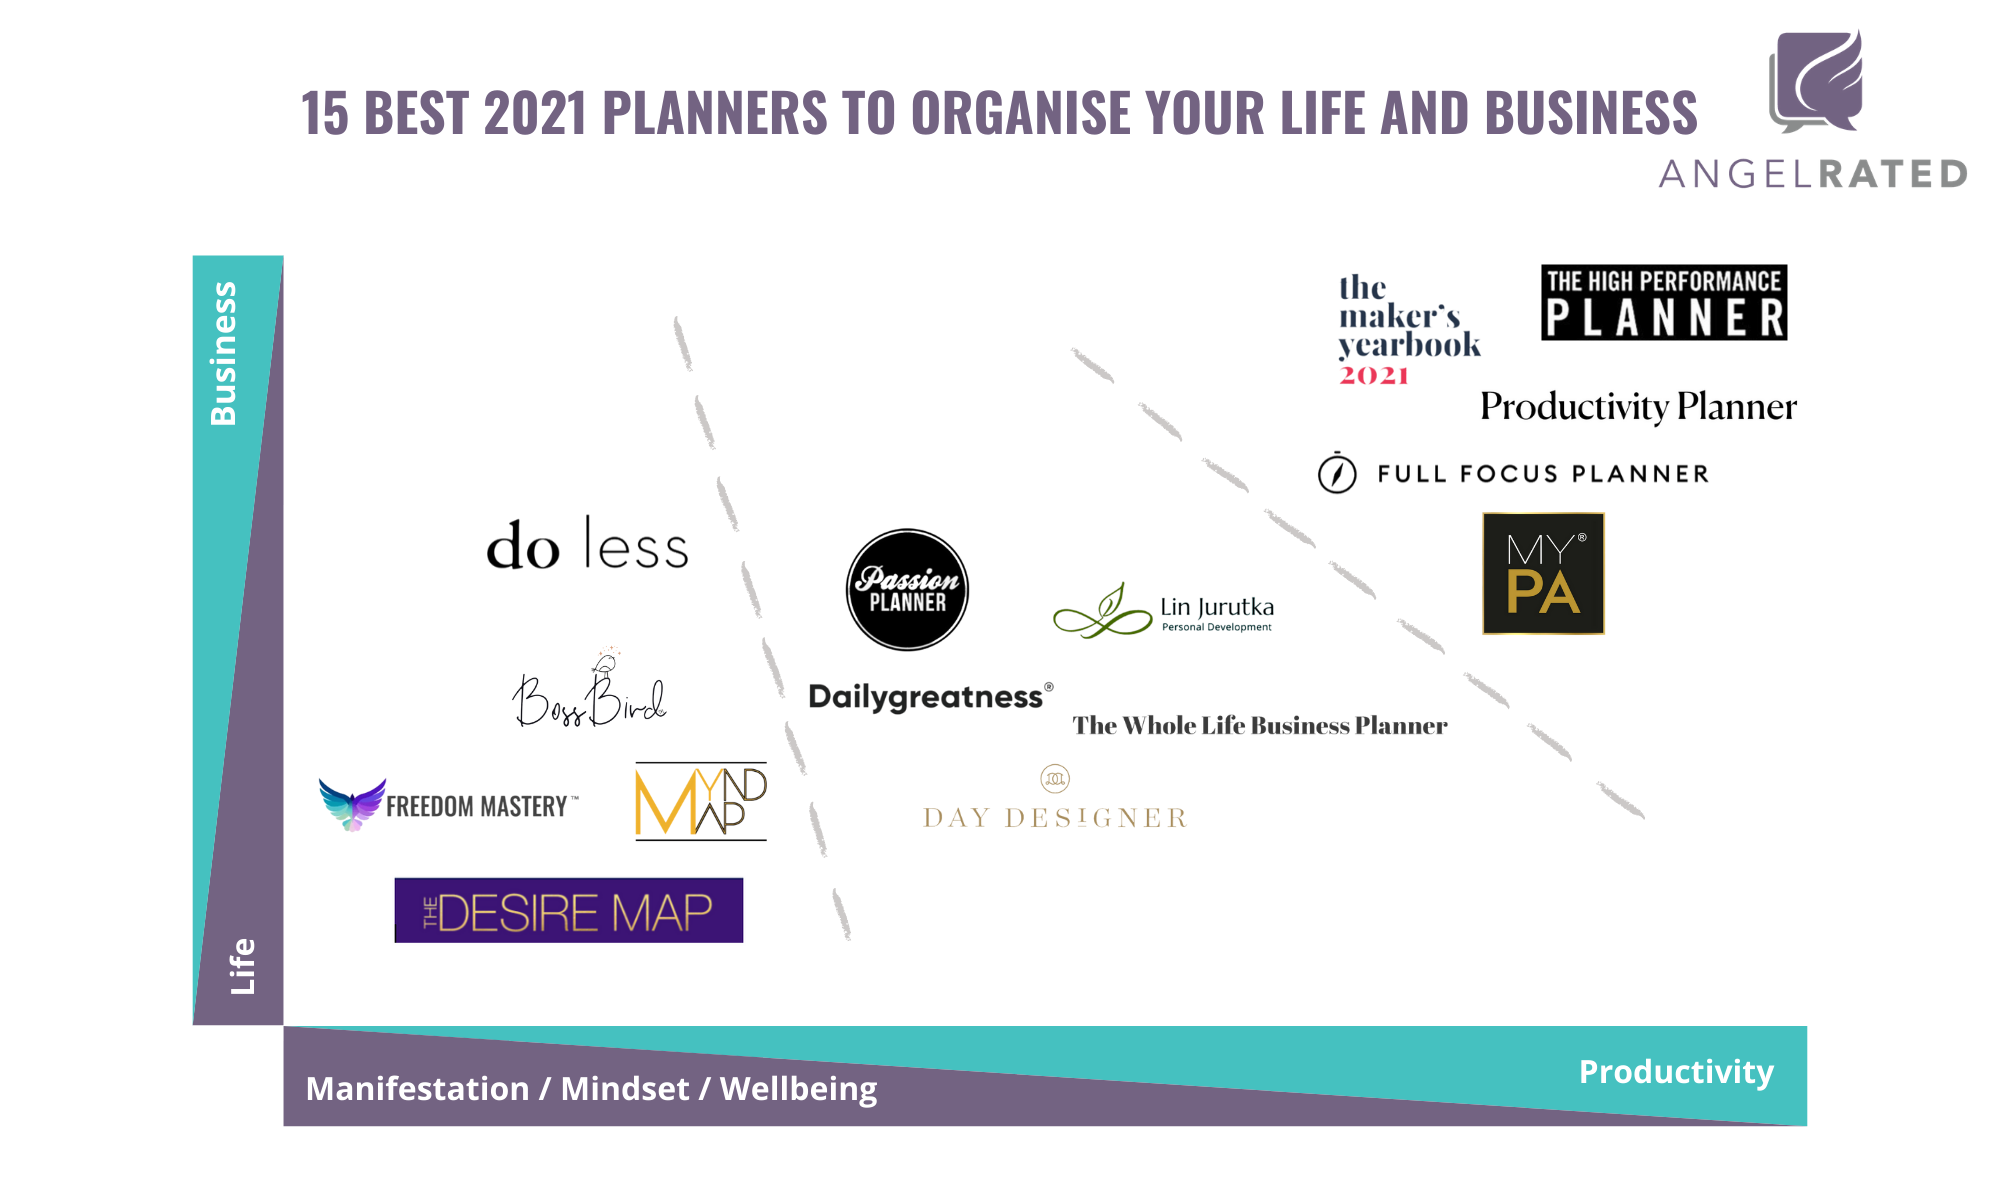 15 Best 2021 Planners to Organise Your Life and Business